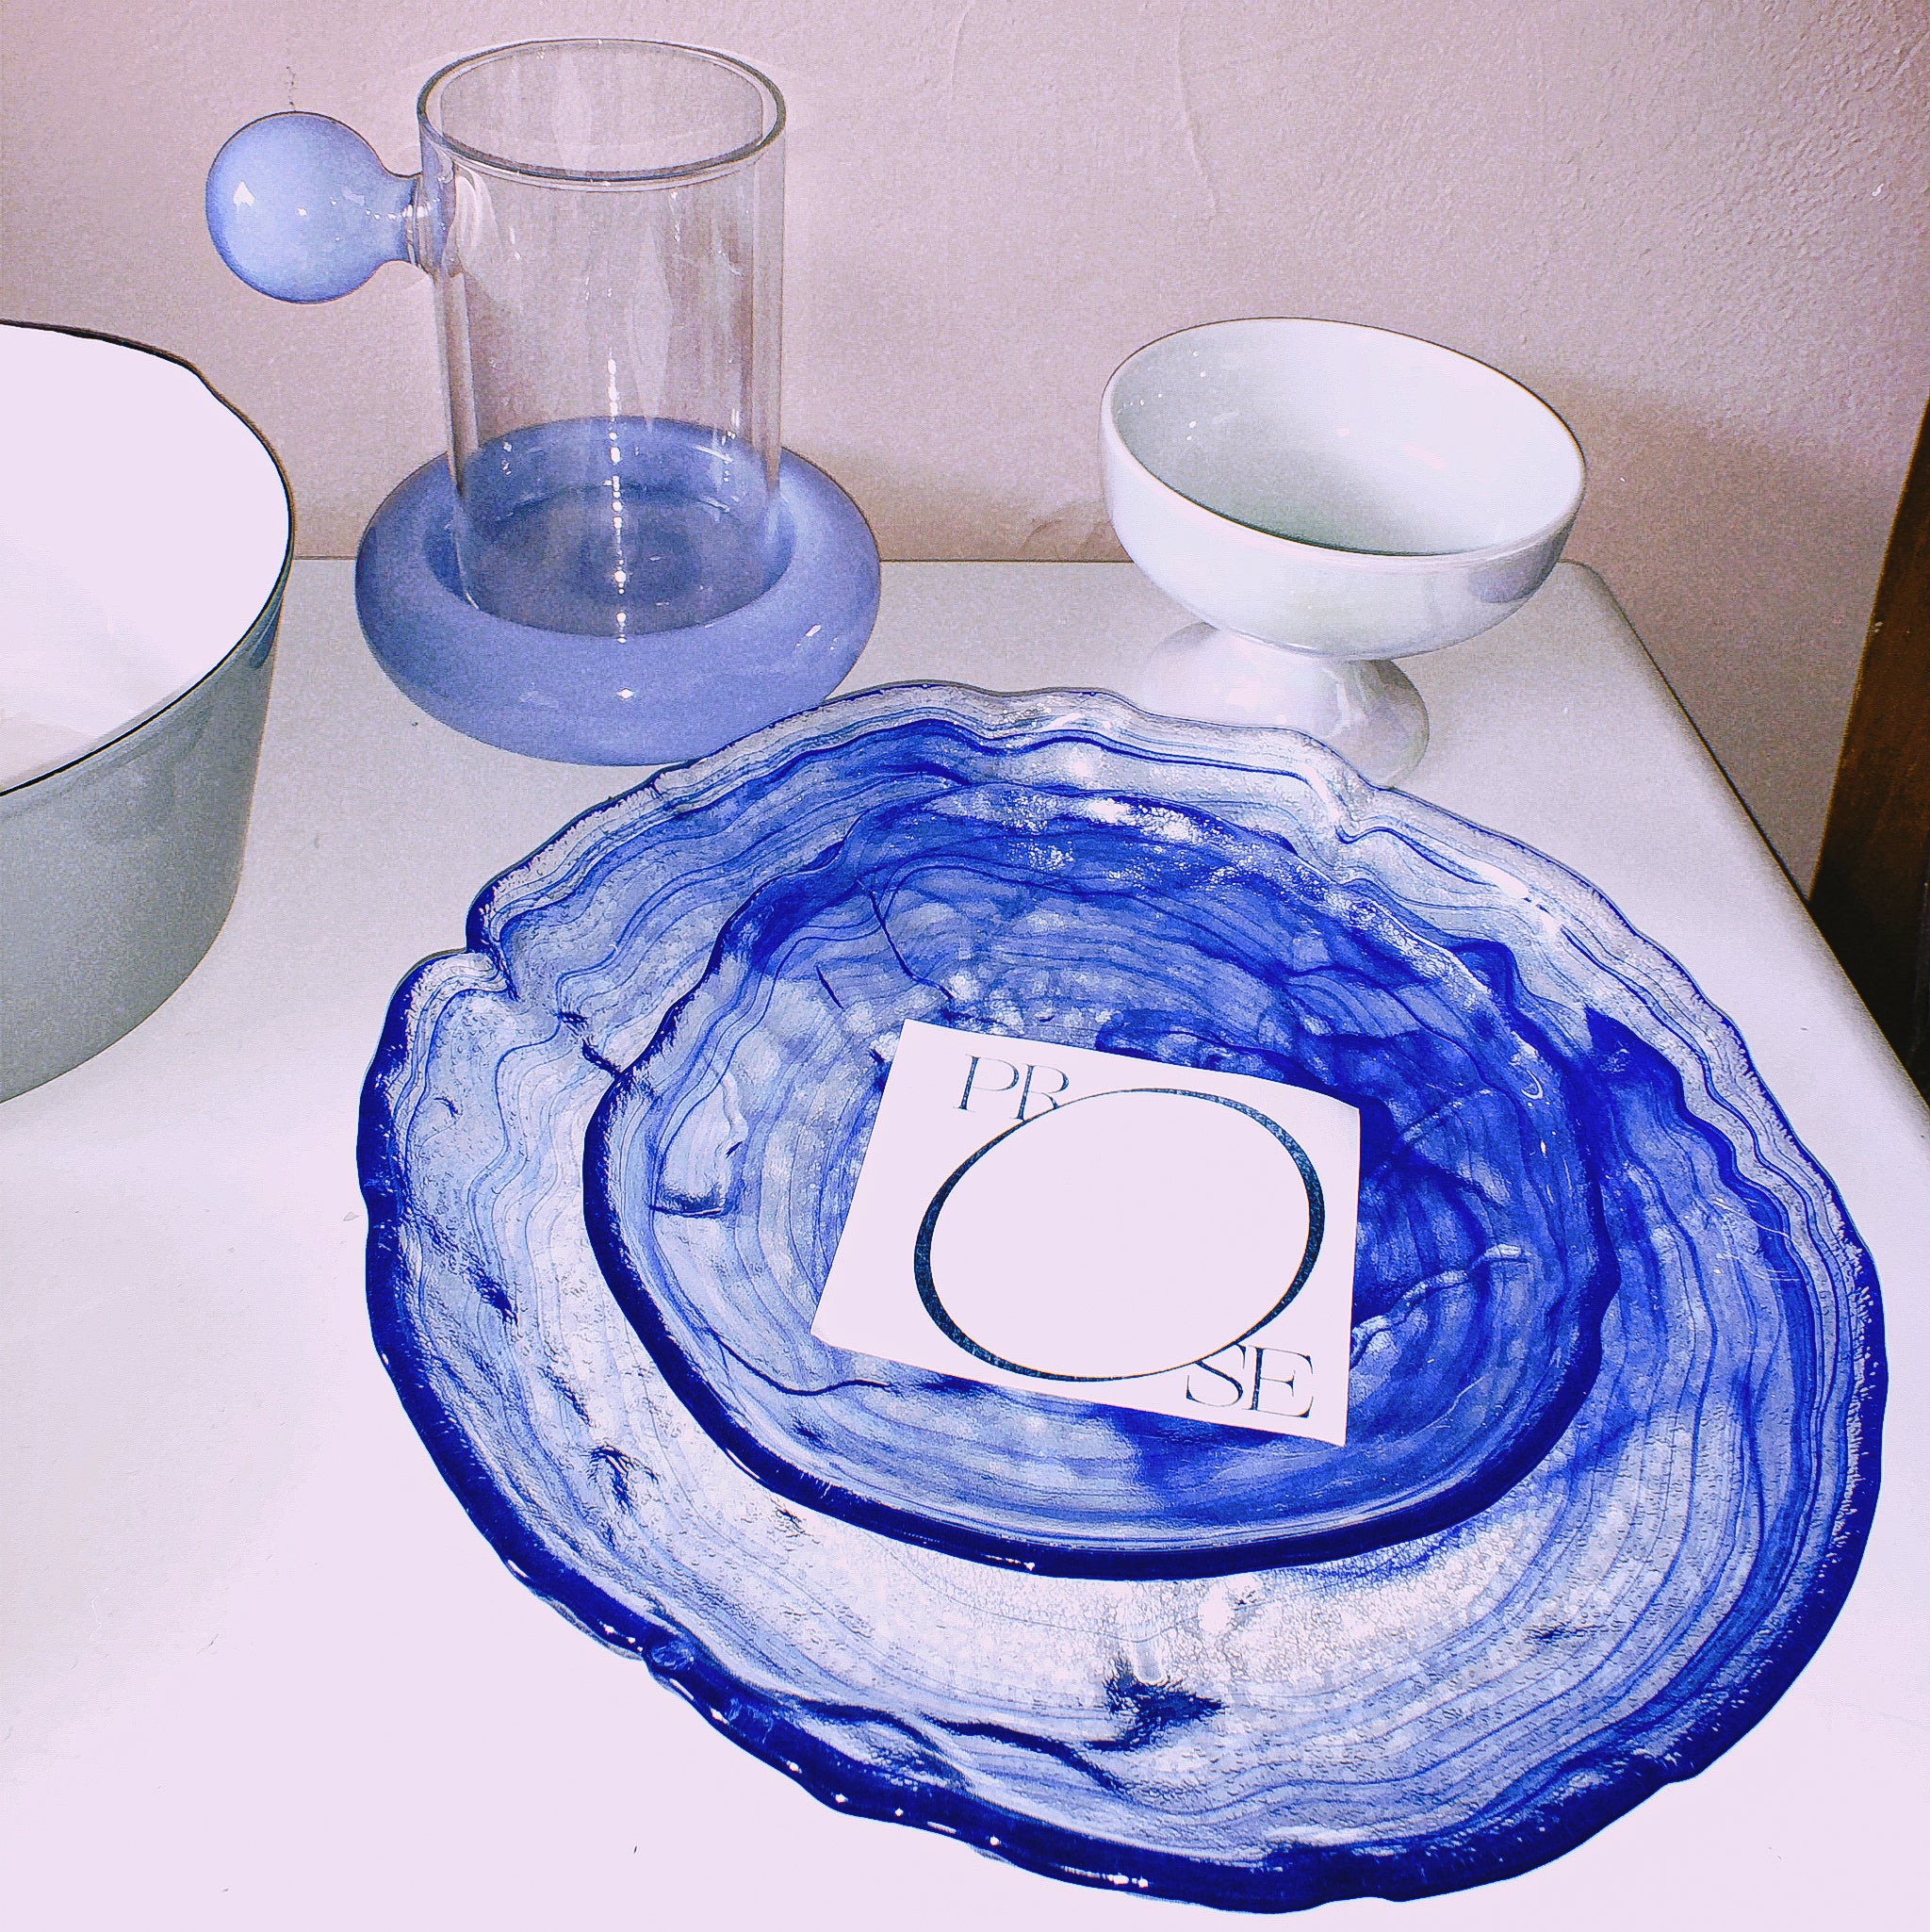 Cobalt Swirl Serving Plates by PROSE Tabletop